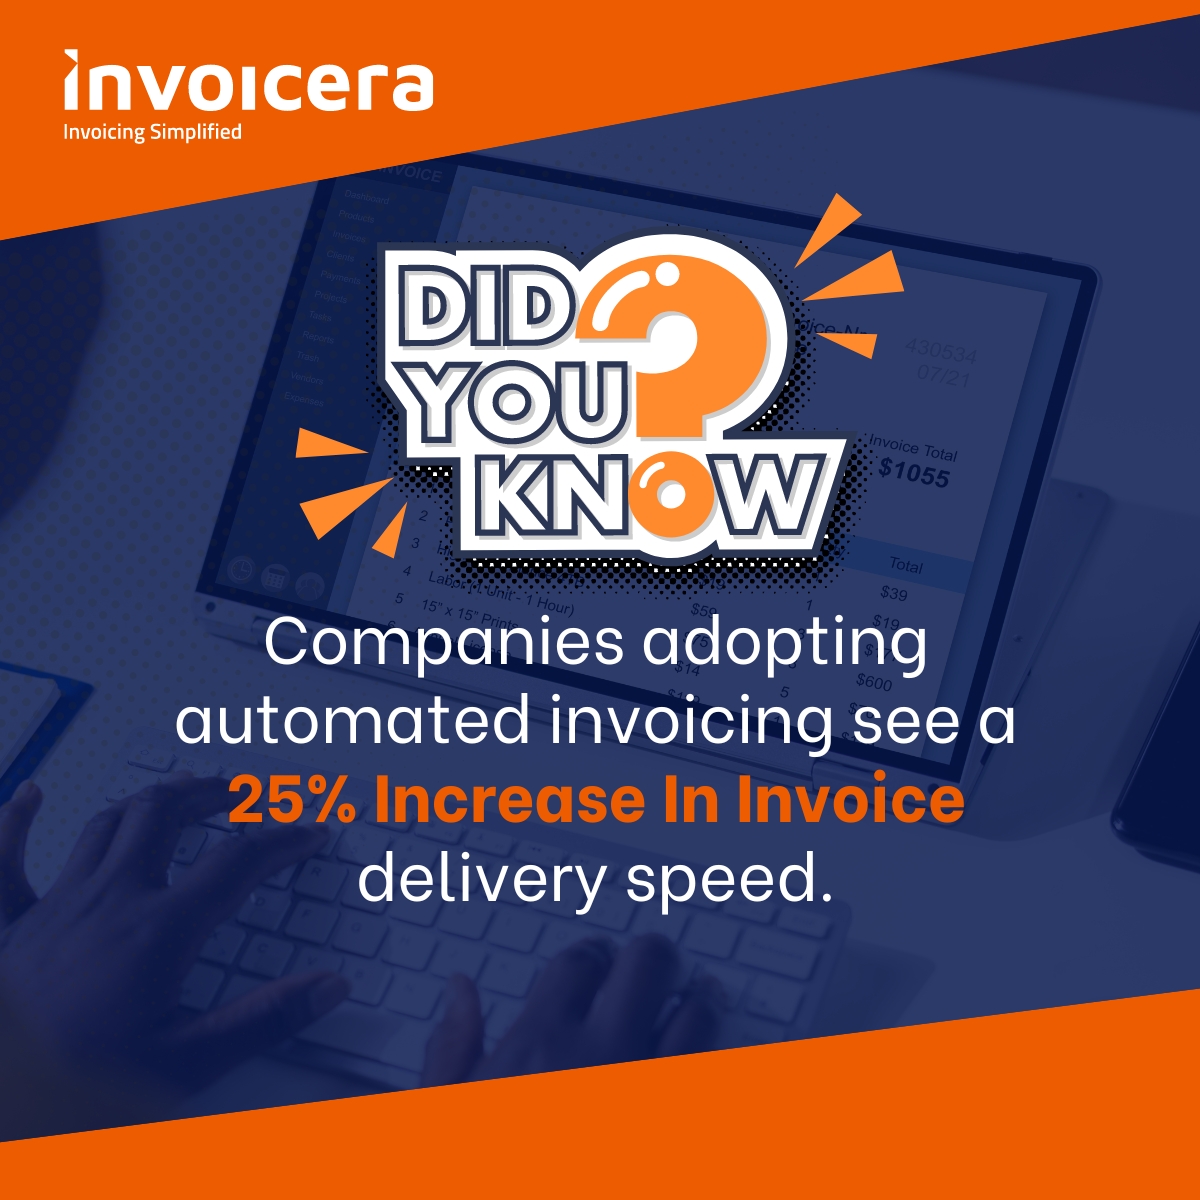 Boost your invoice speed by 25% with automation! 🚀 Quick benefits: 🕒 Faster billing, 💡 Simplified processes, 📊 Better accuracy. For more info, click on the link:- invoicera.com/blog/business-… #AutomationSuccess #InvoicingSpeed #BusinessEfficiency #TechInnovation